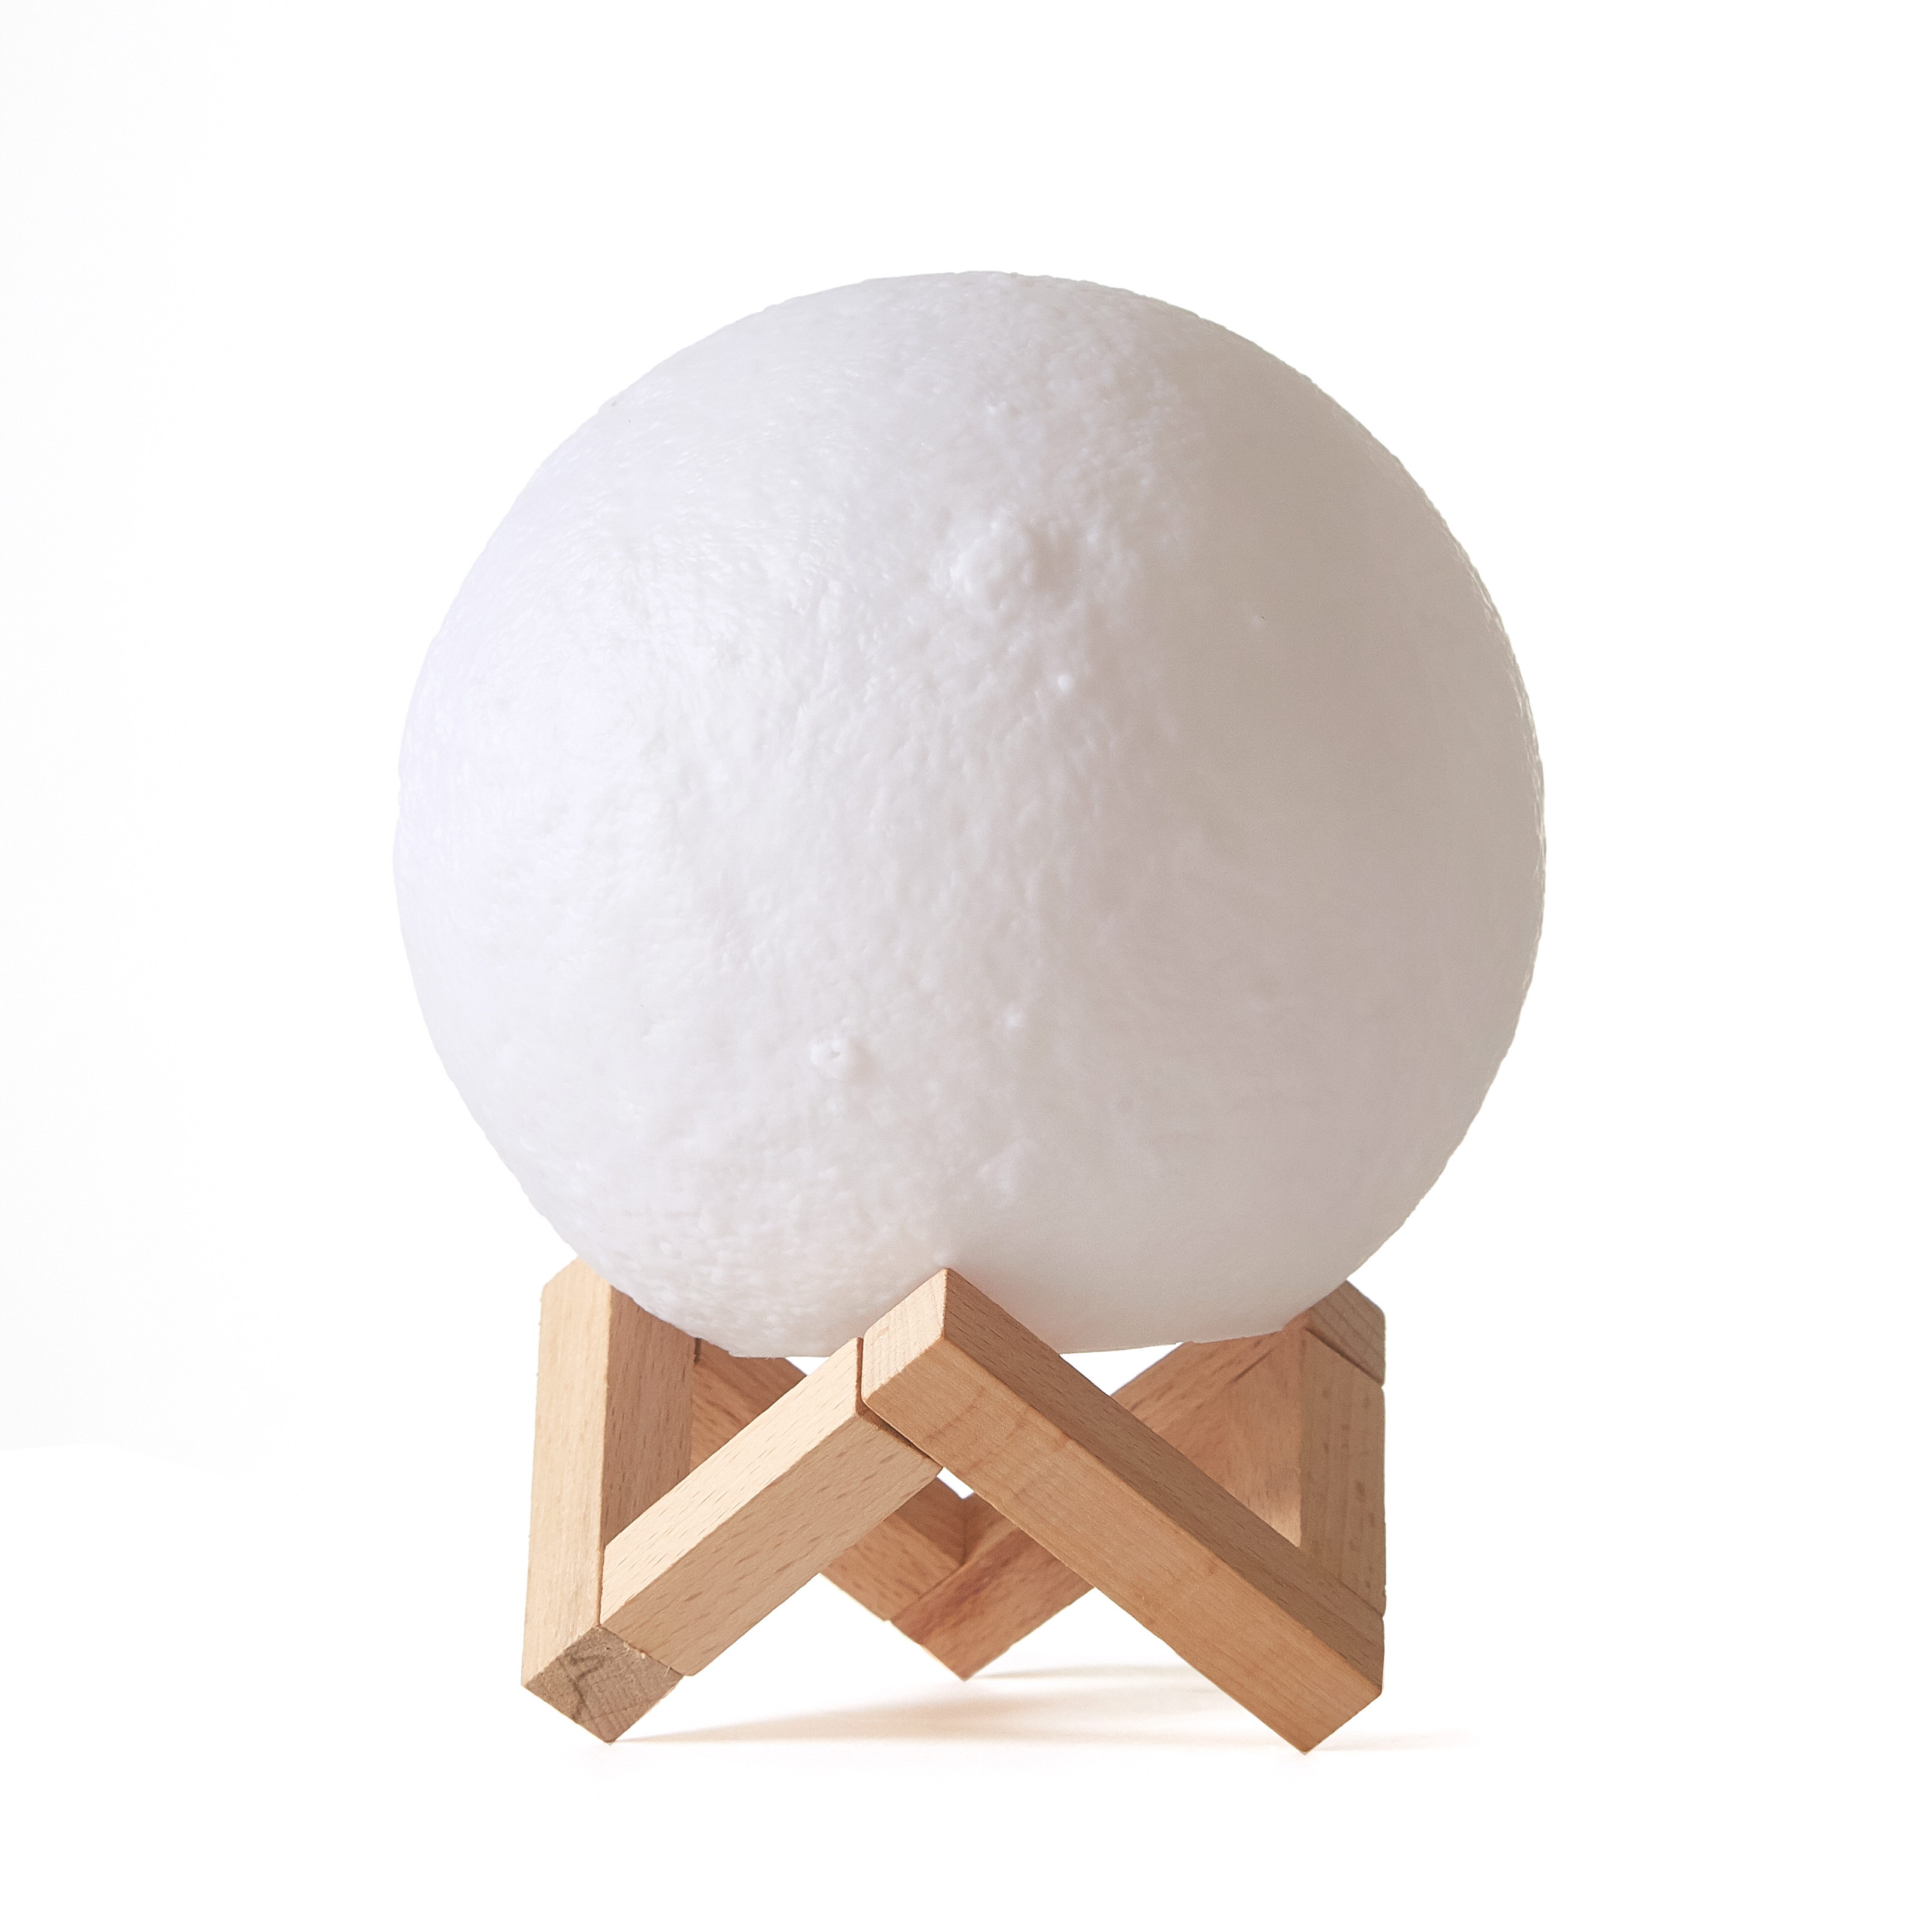 Urban Shop 3D Print Color Changing Moon Lamp with Wood Stand, remote control and USB Adaptor, 7.5'' x 5.5'', White - image 1 of 8